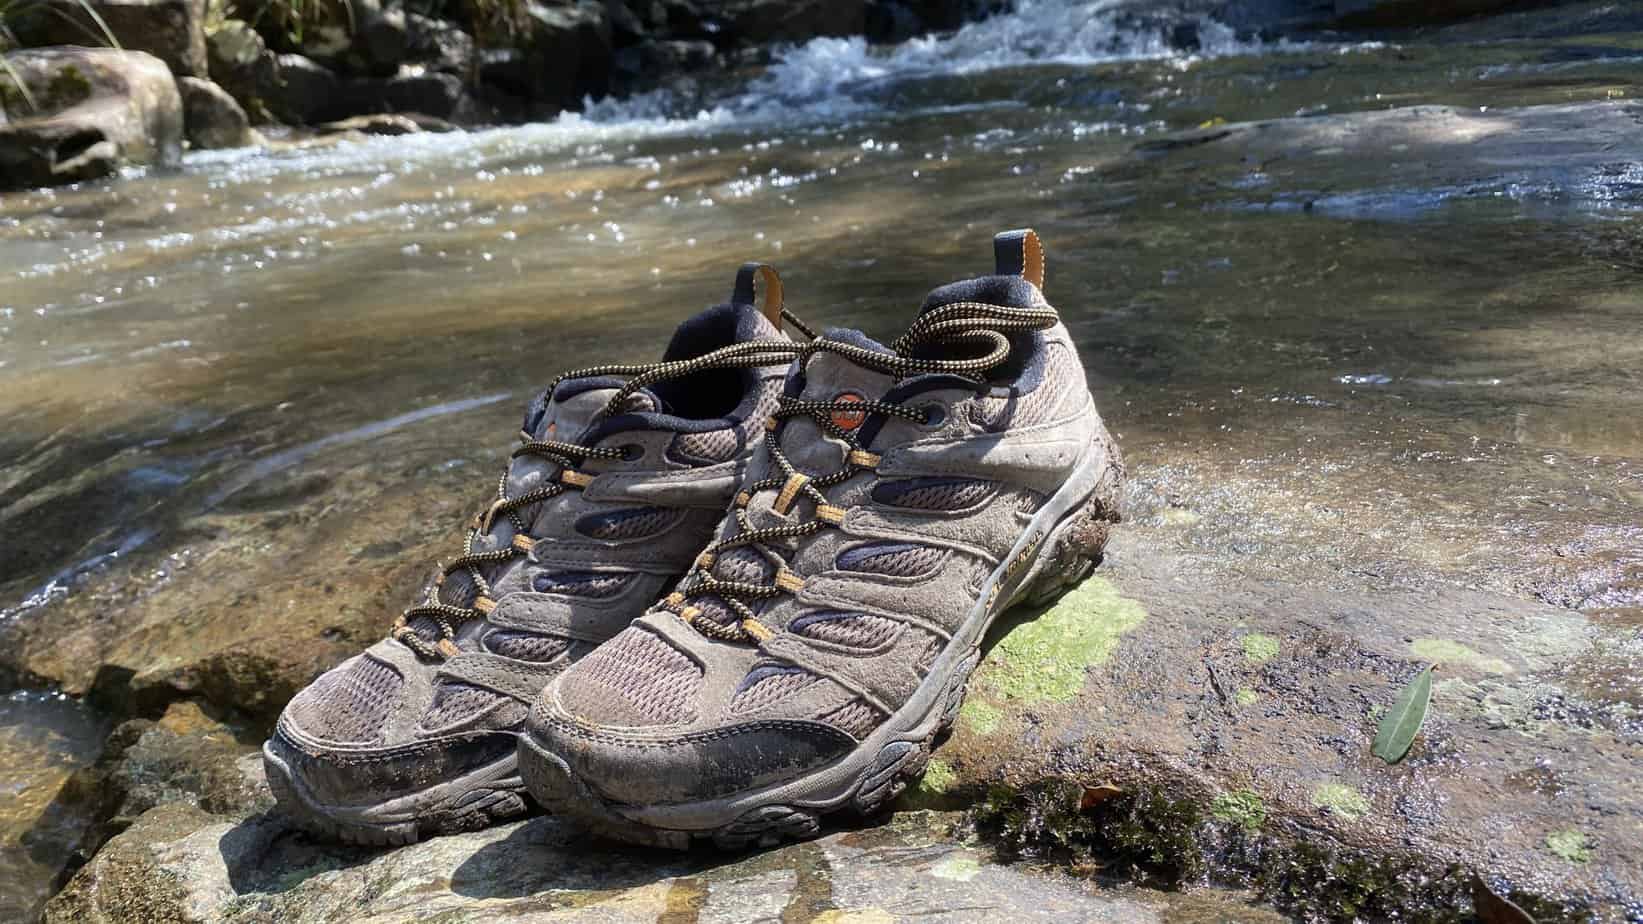 When torn between two Merrells no-one is a fool - Lotsafreshair - Review